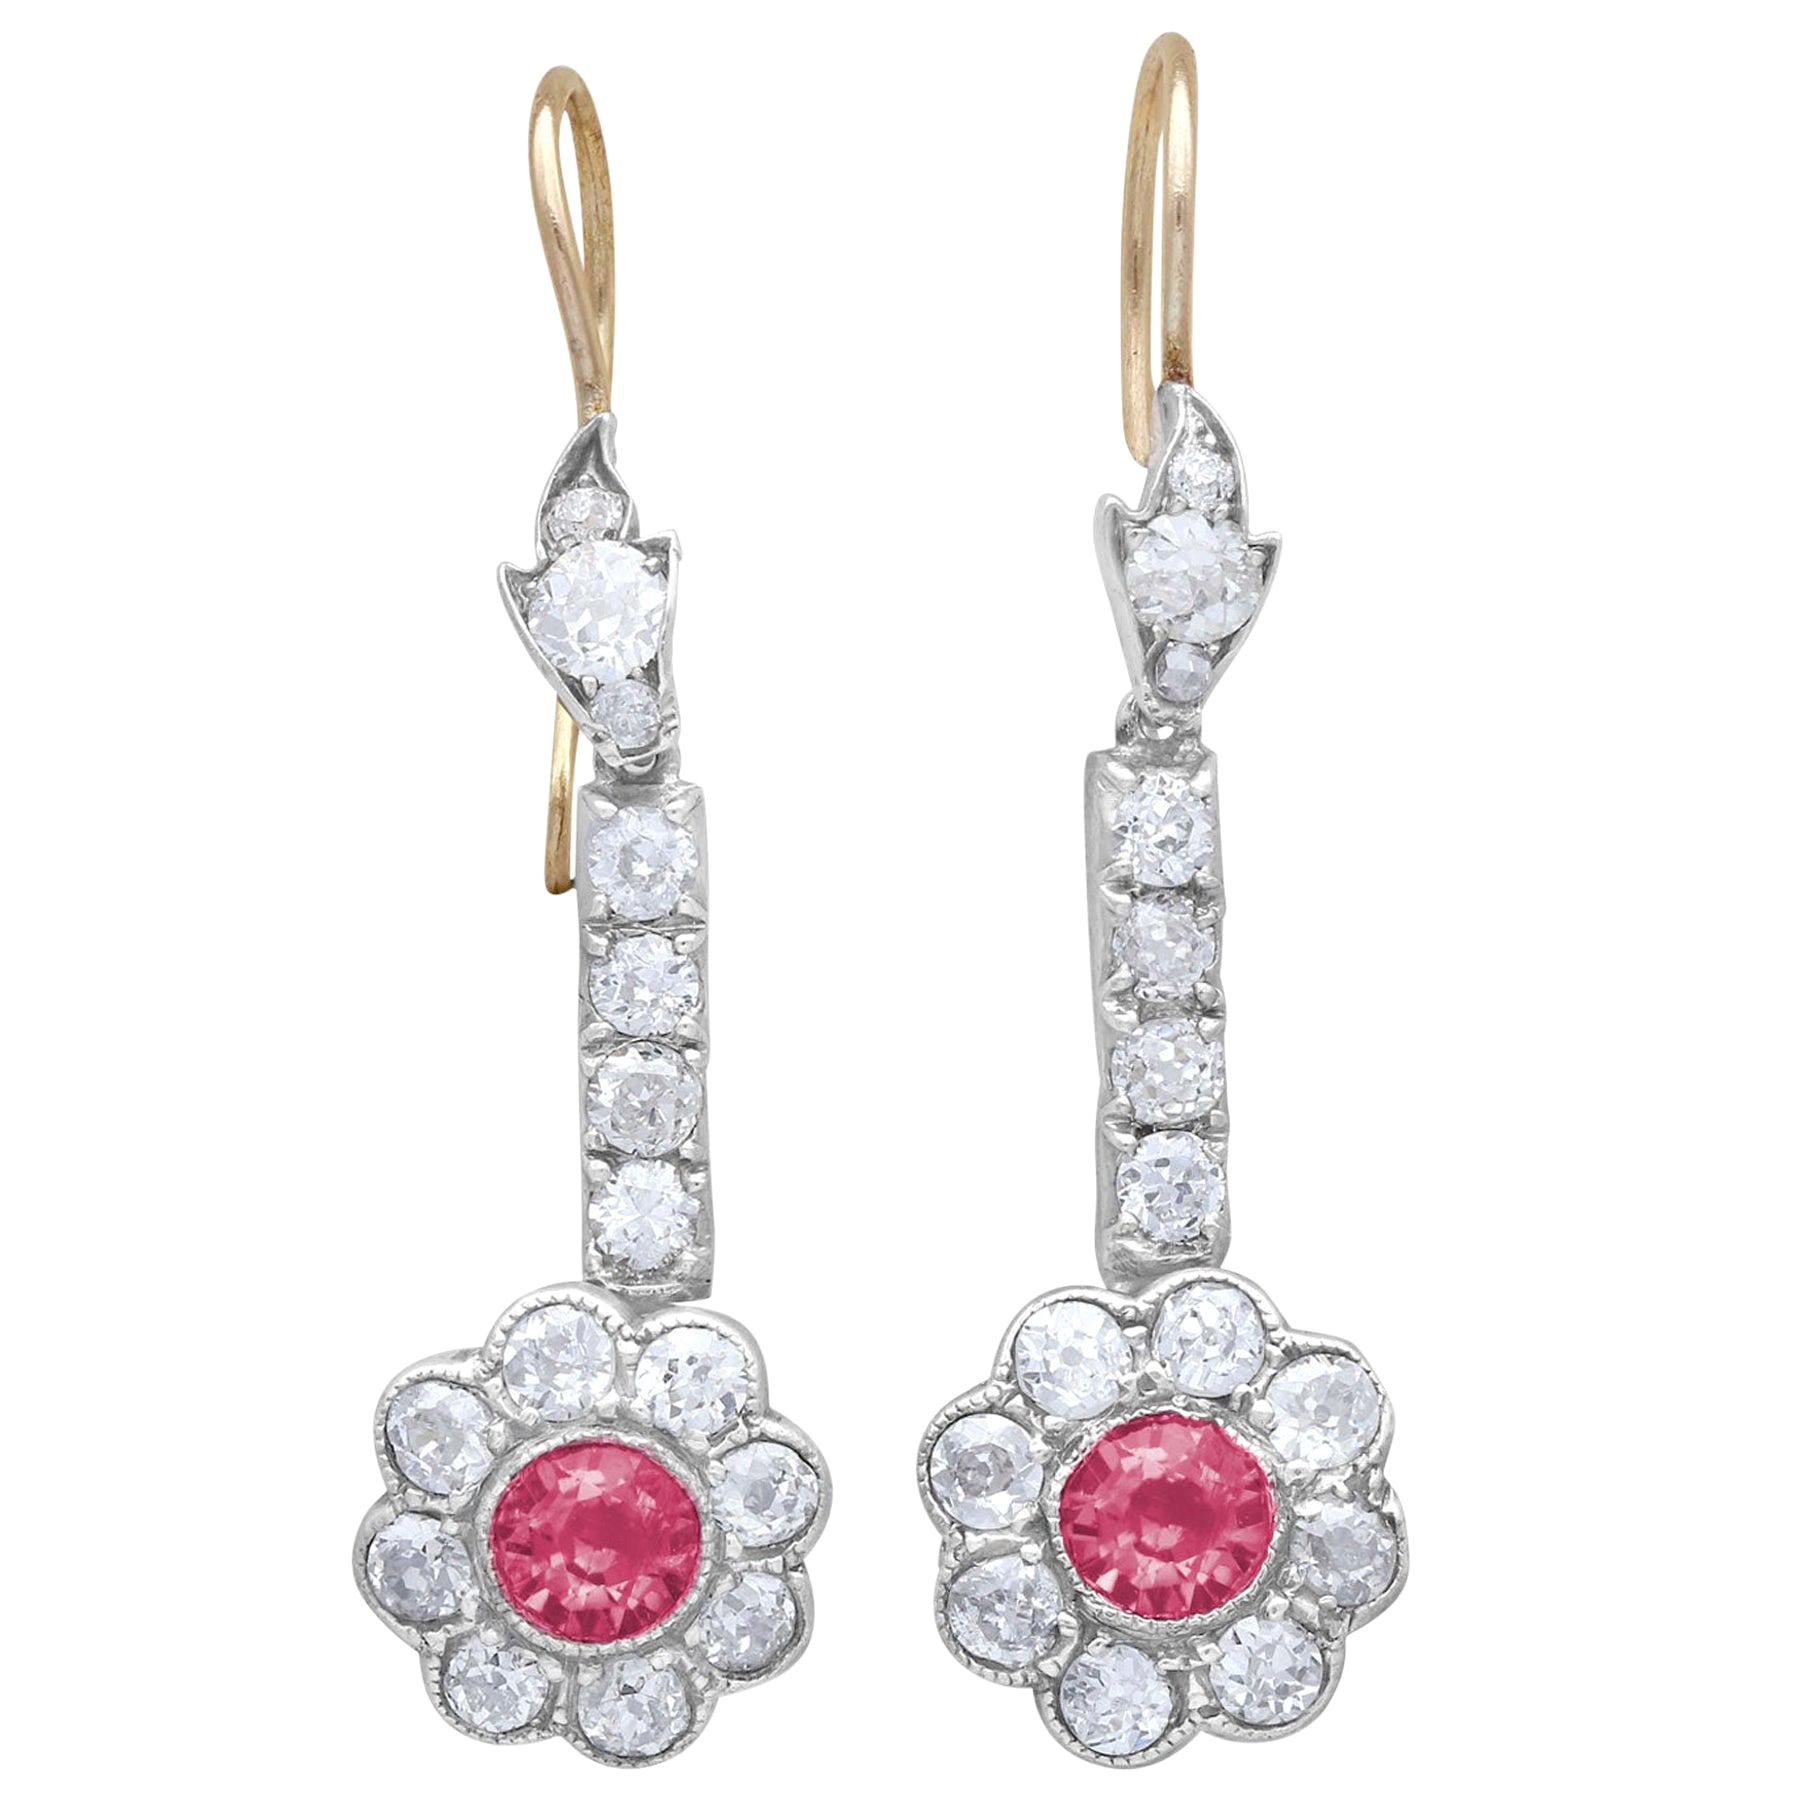 2.42 Carat Diamond and 1.05 Carat Pink Sapphire Drop Earrings For Sale